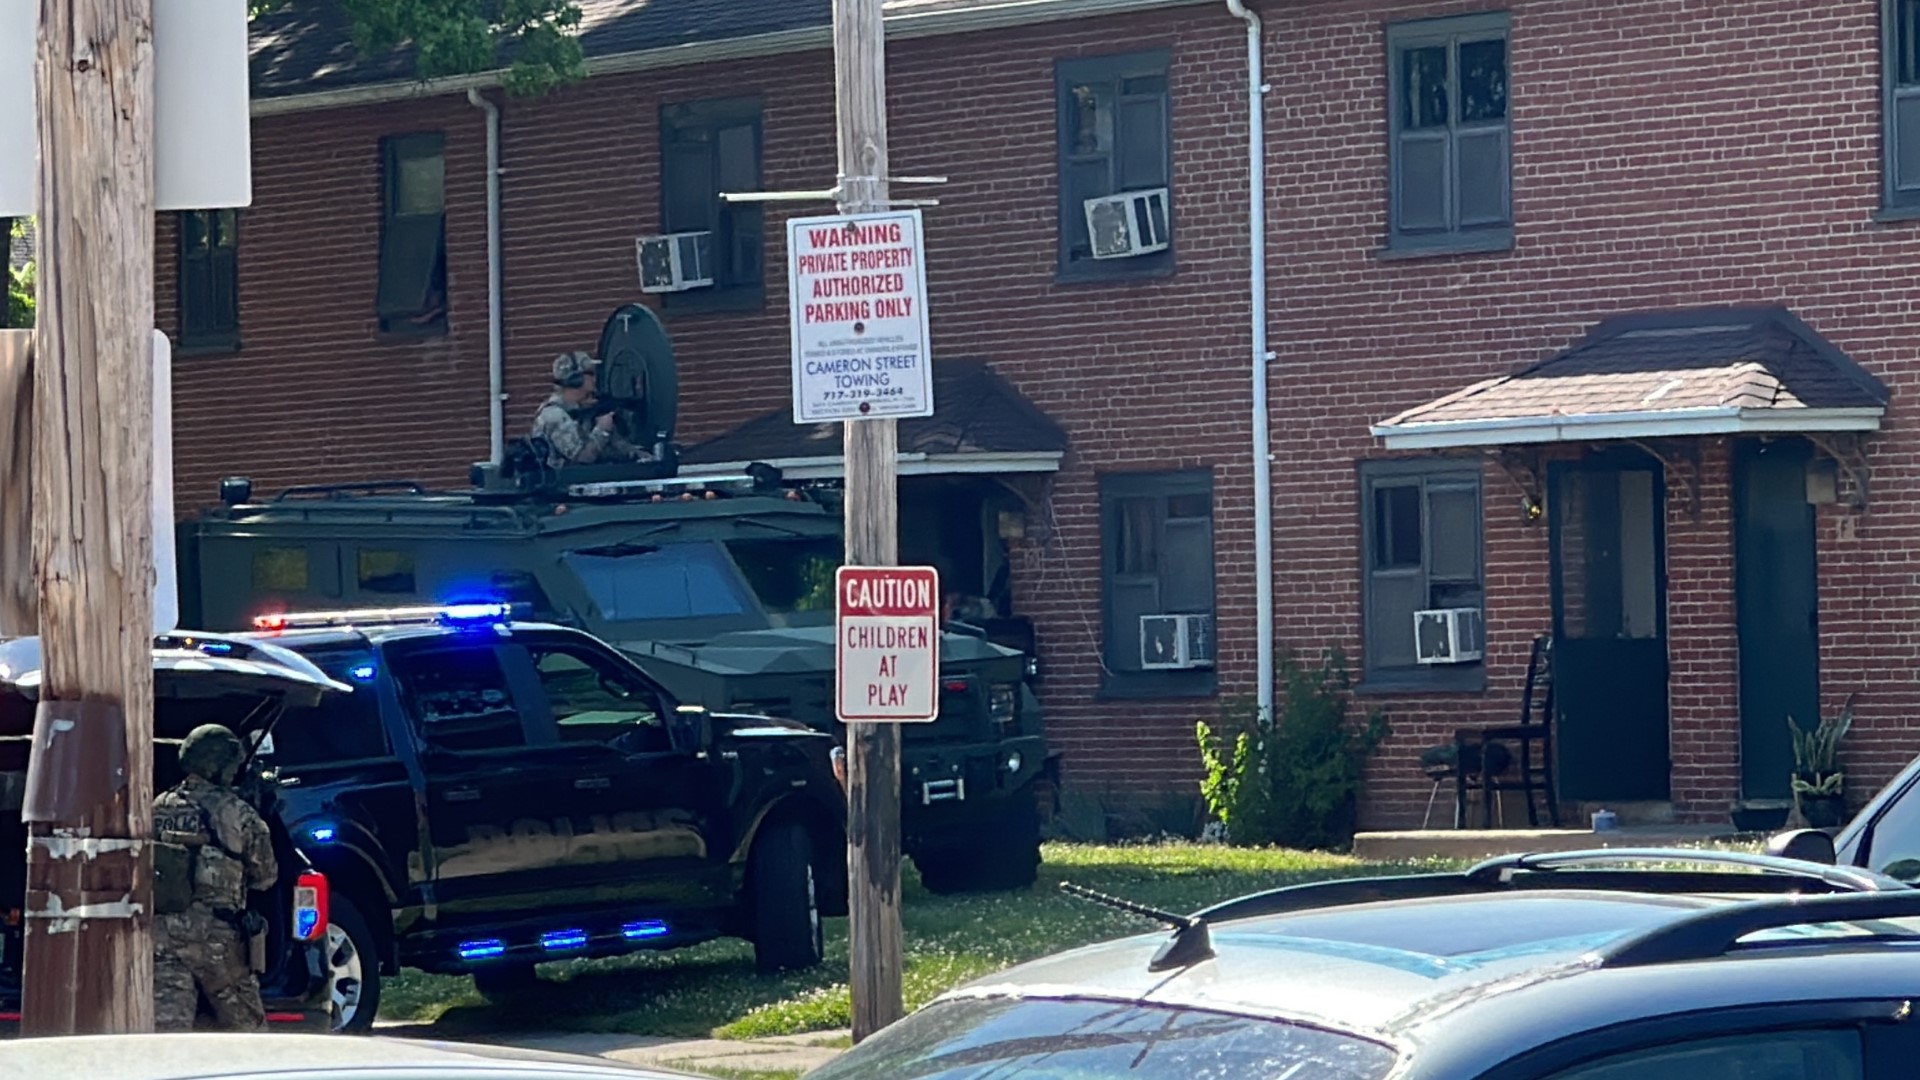 According to Dauphin County DA Fran Chardo, the suspect was shot during the standoff and the child was rescued, unharmed.